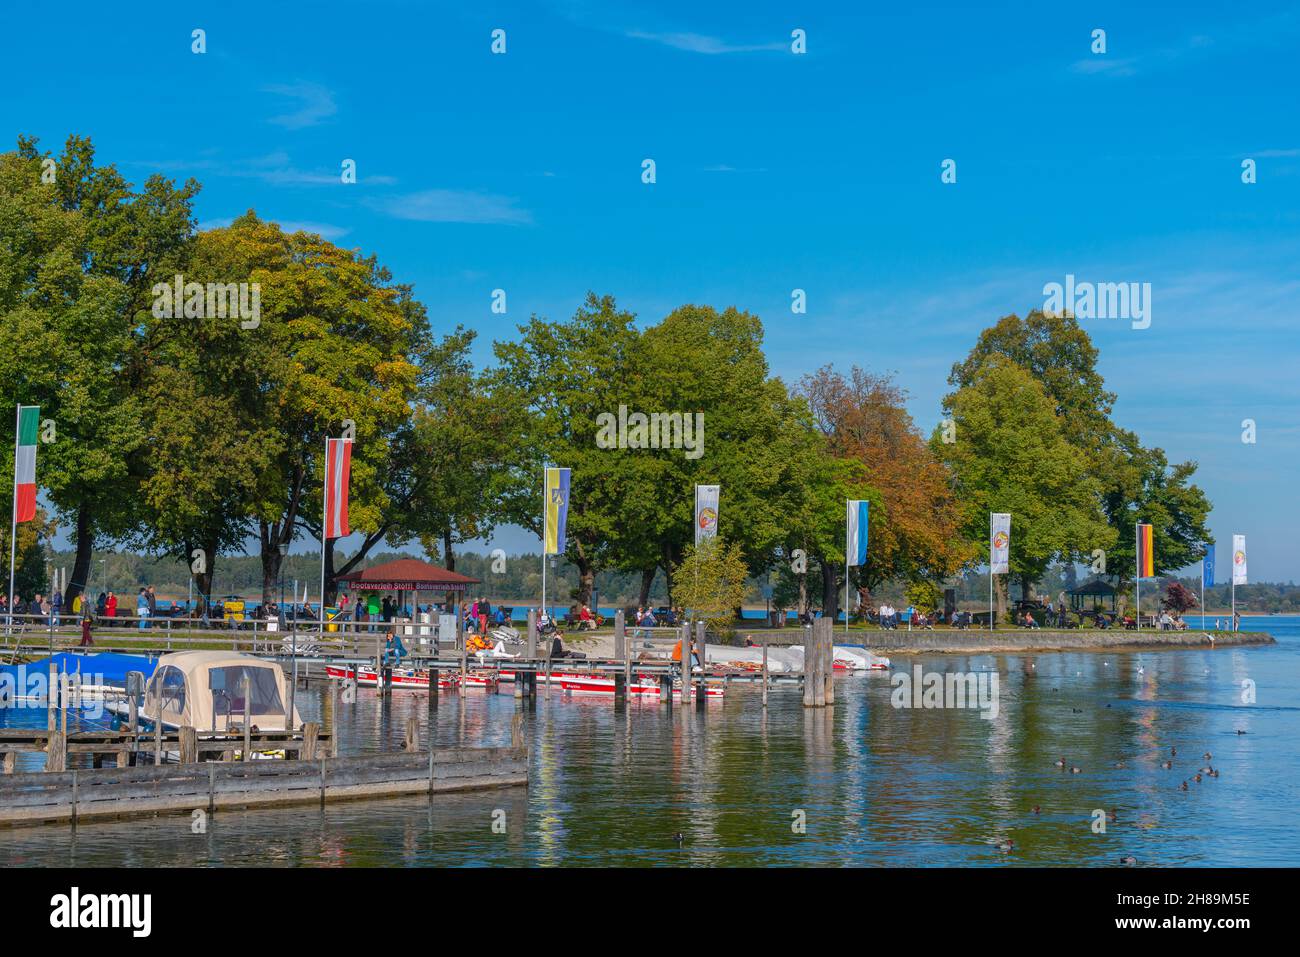 Prien town on Lake Chiemsee in the prealpine plateau Chiemgau, lake and the Alps, Upper Bavaria, Southern Germany, Europe Stock Photo